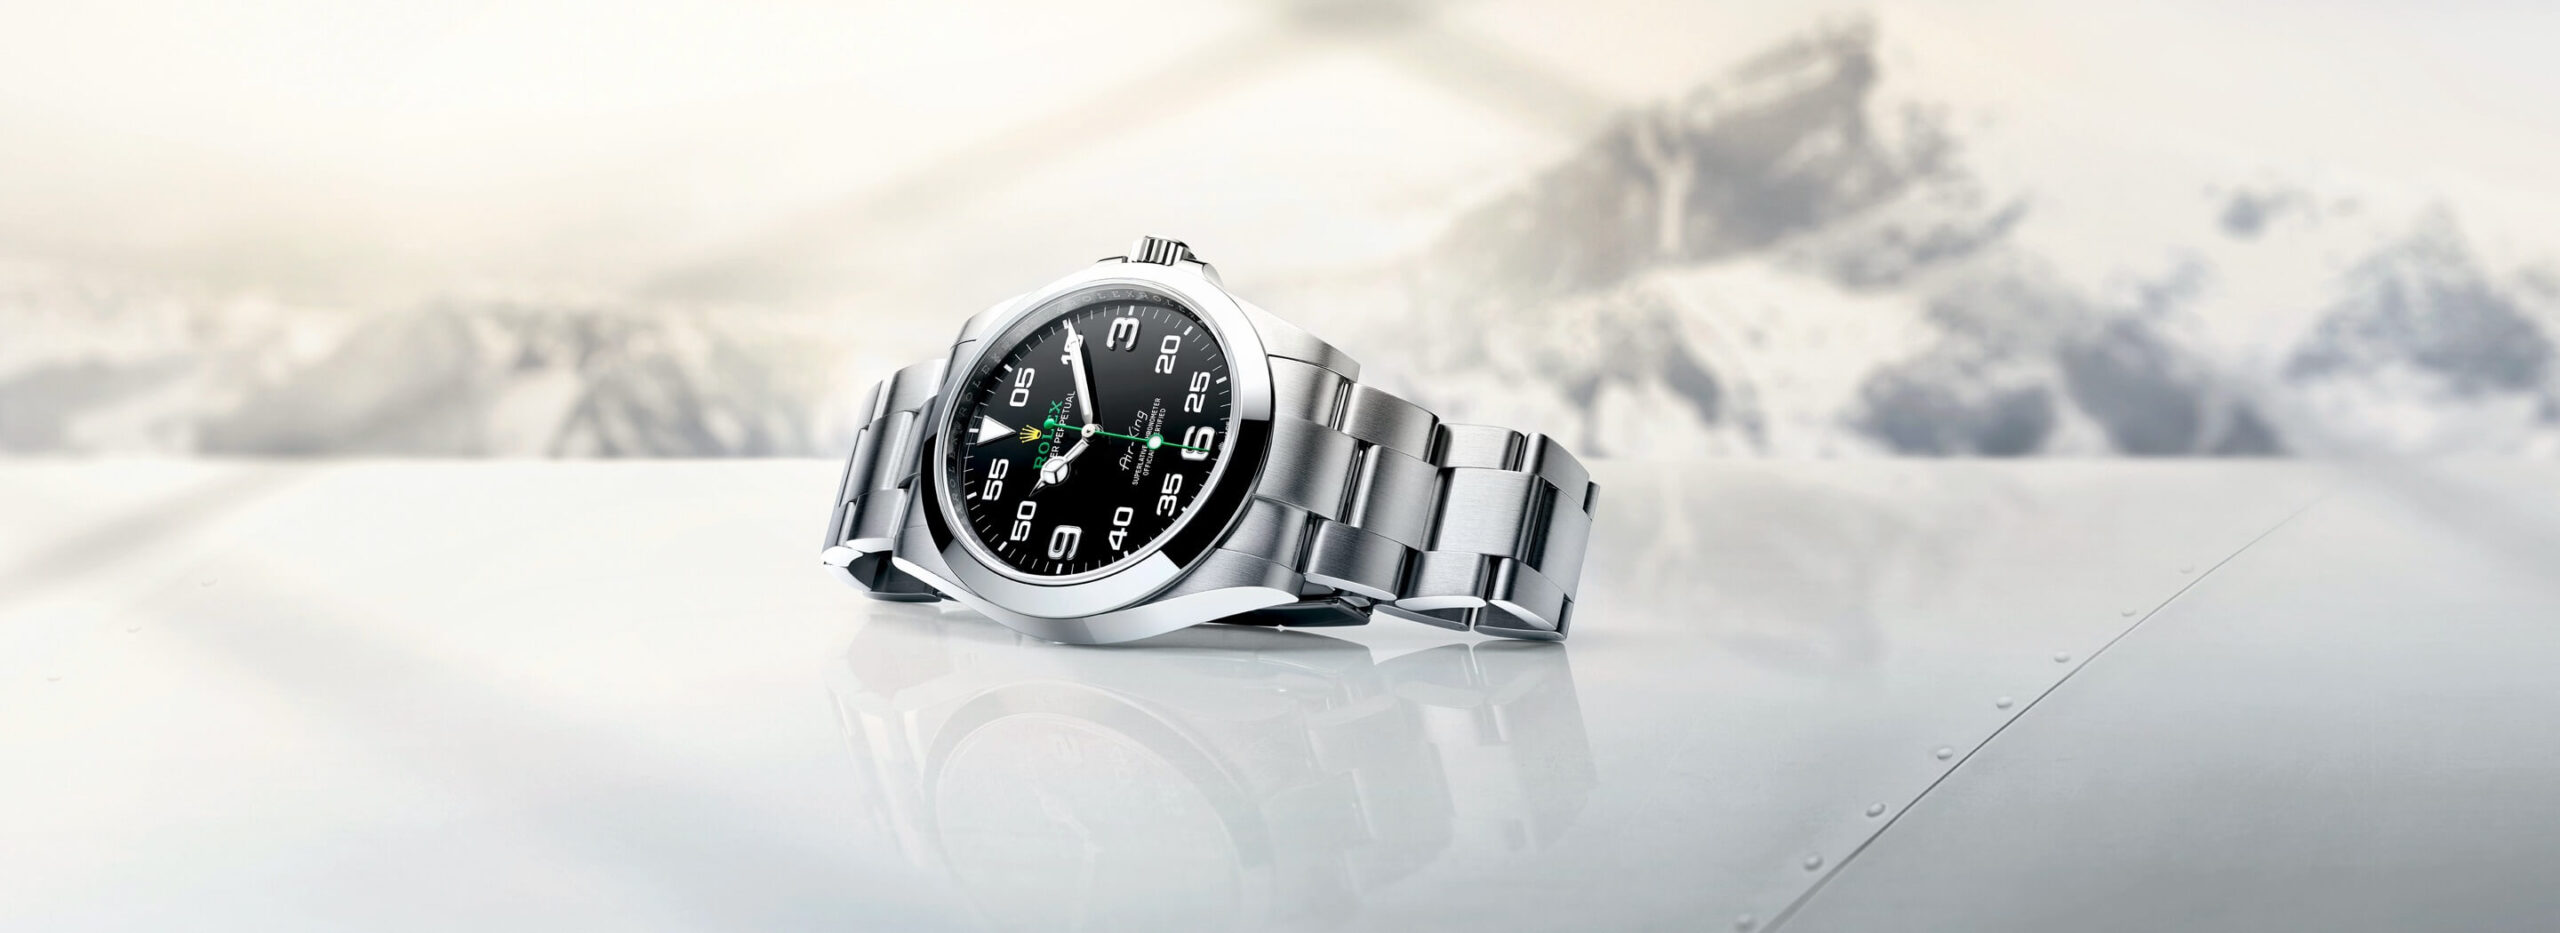 rolex air king watches - global watch company